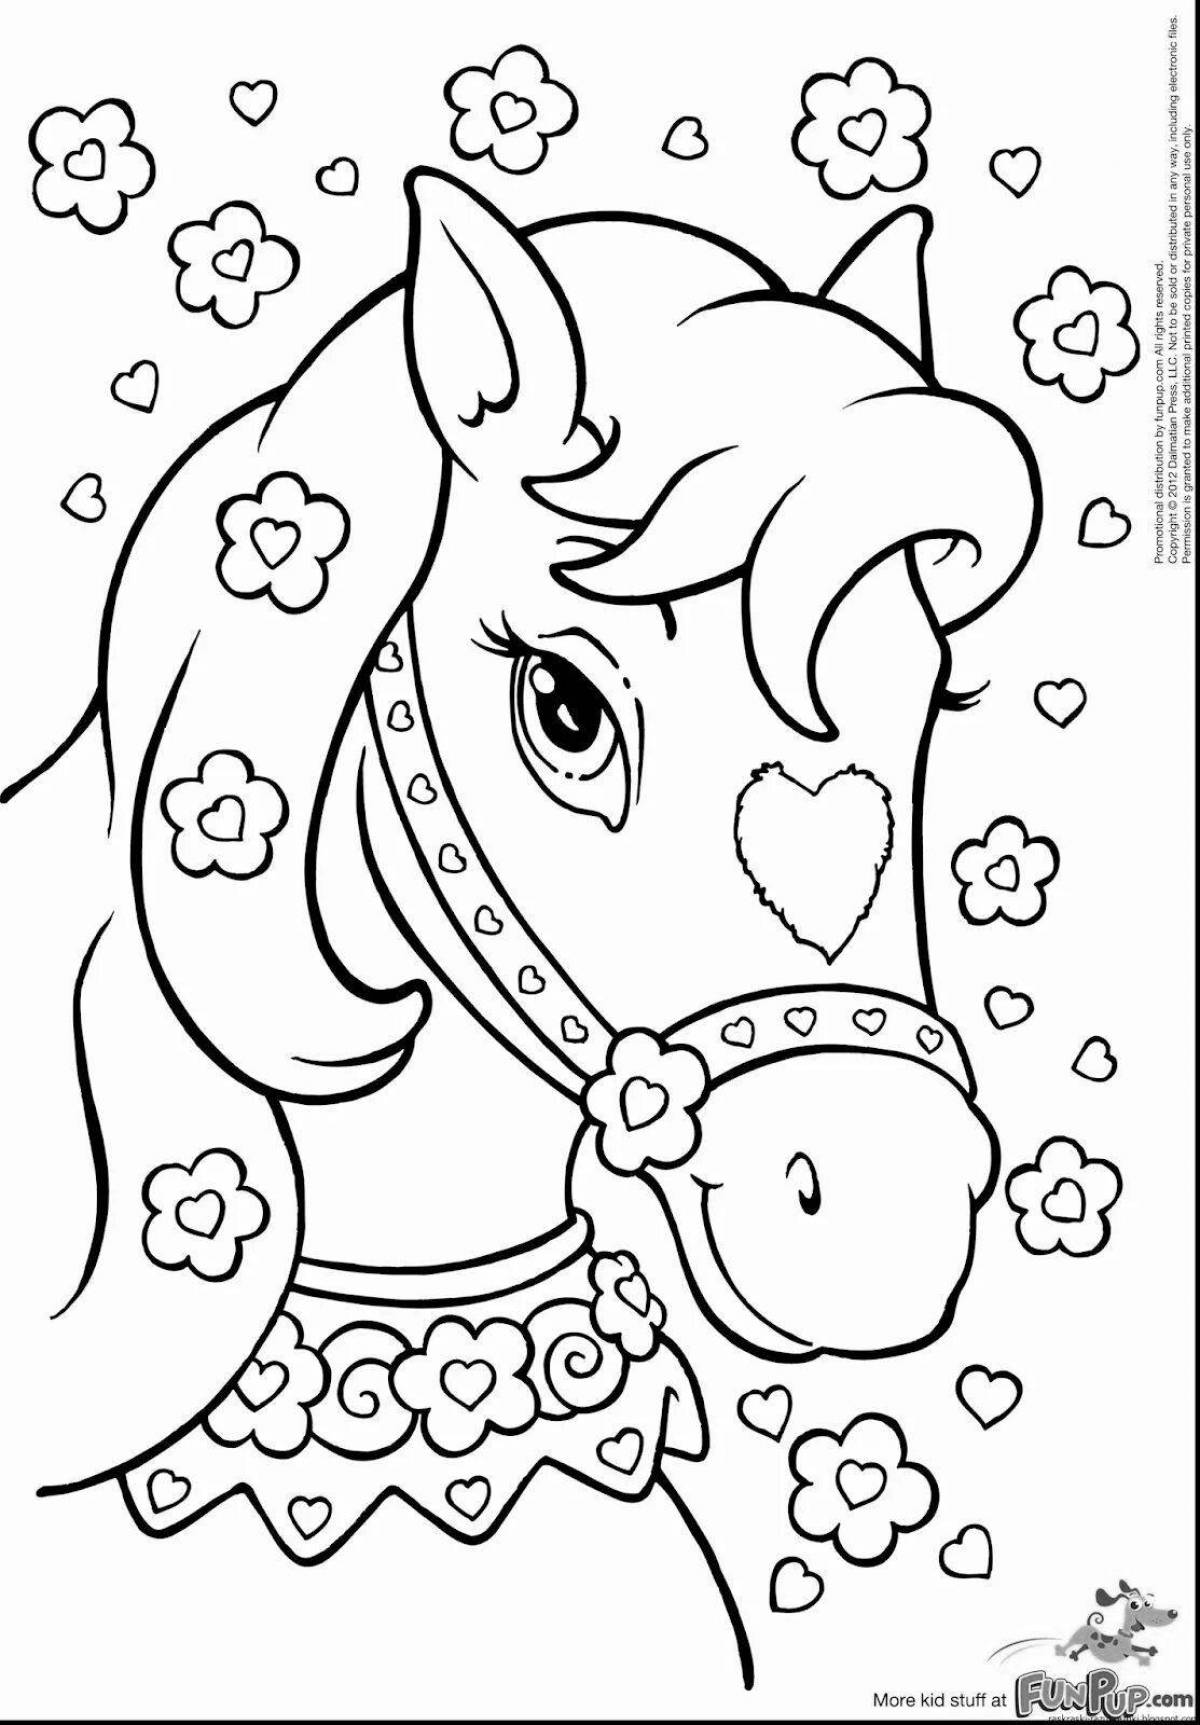 Vivacious coloring page coloring book for girls 6 7 years old